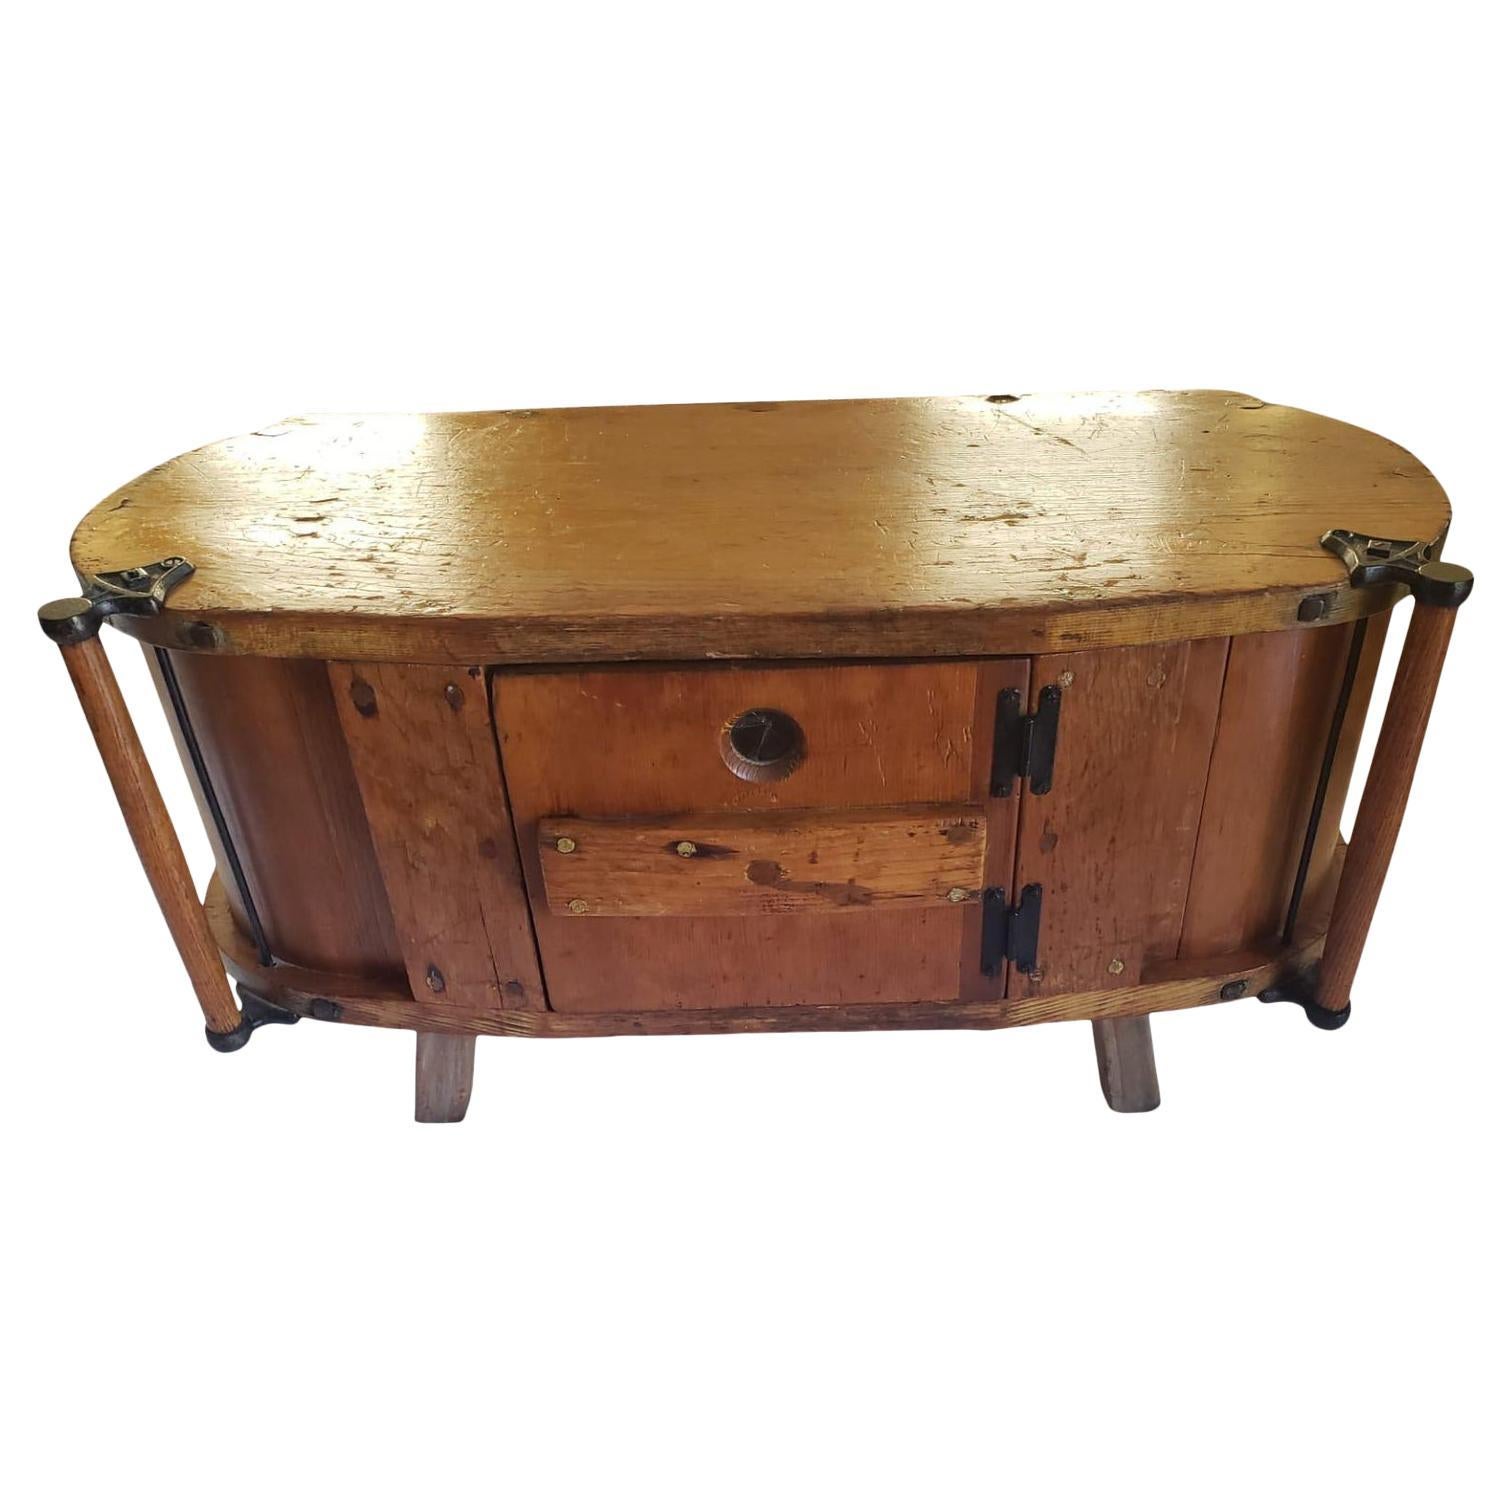 Antique Butter Churn Table Cabinet with Front Center Door